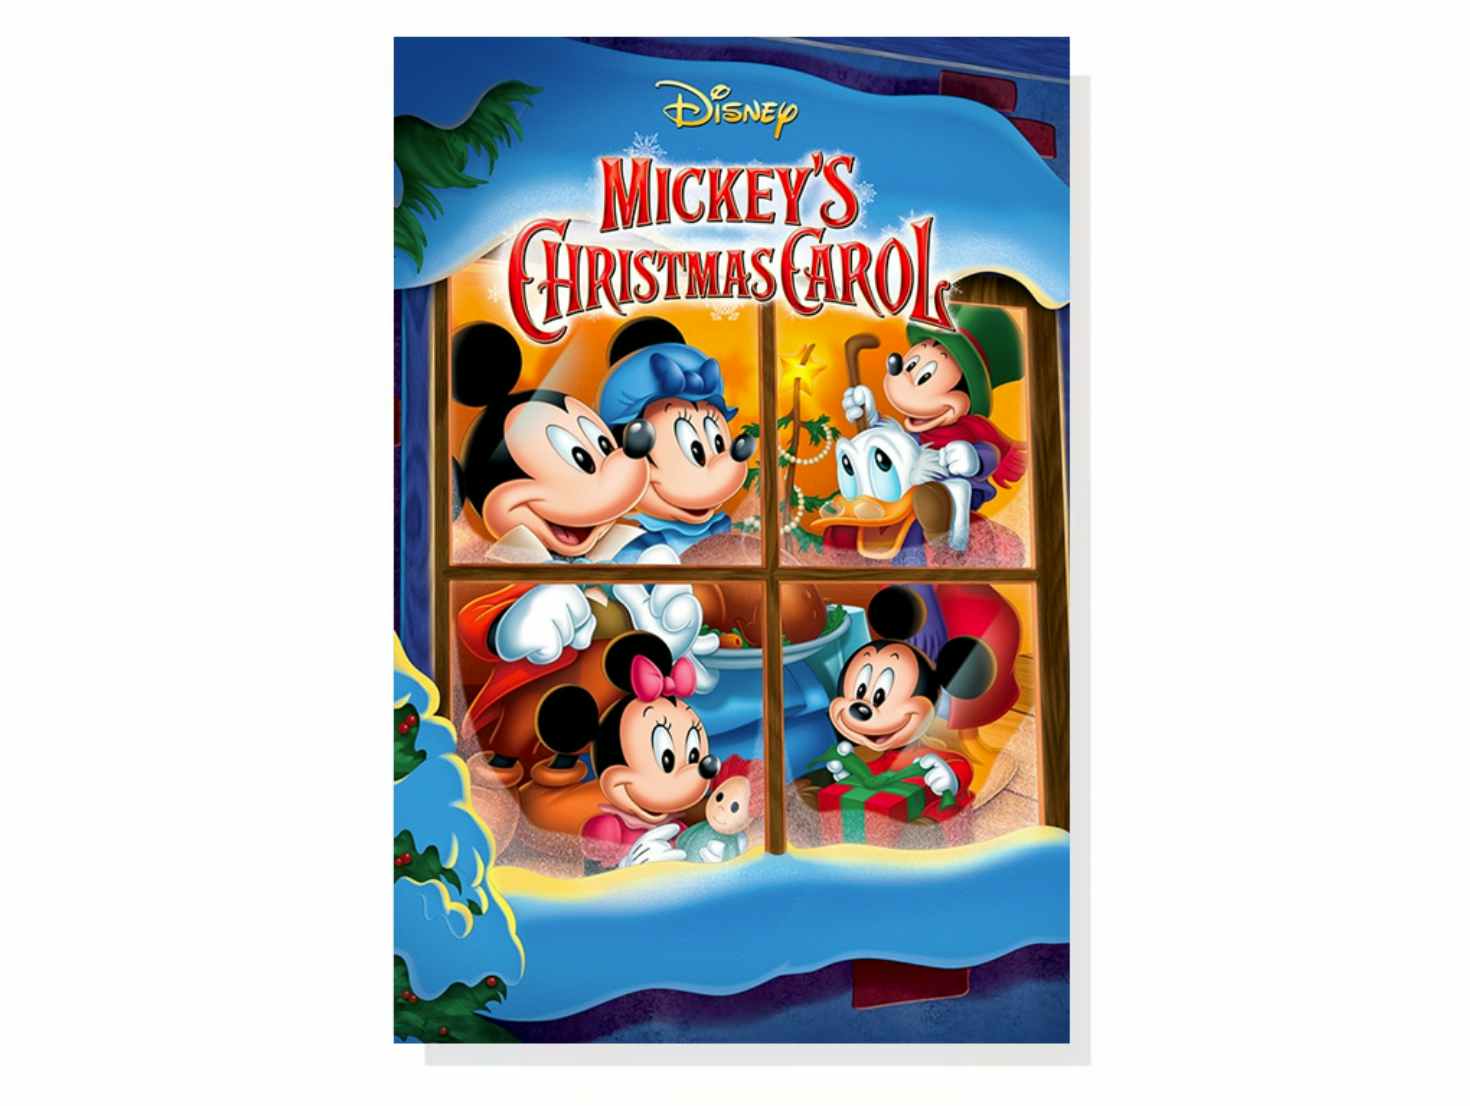 Movie poster for Mickey's Christmas Carol, one of the best Christmas movies on Disney Plus.